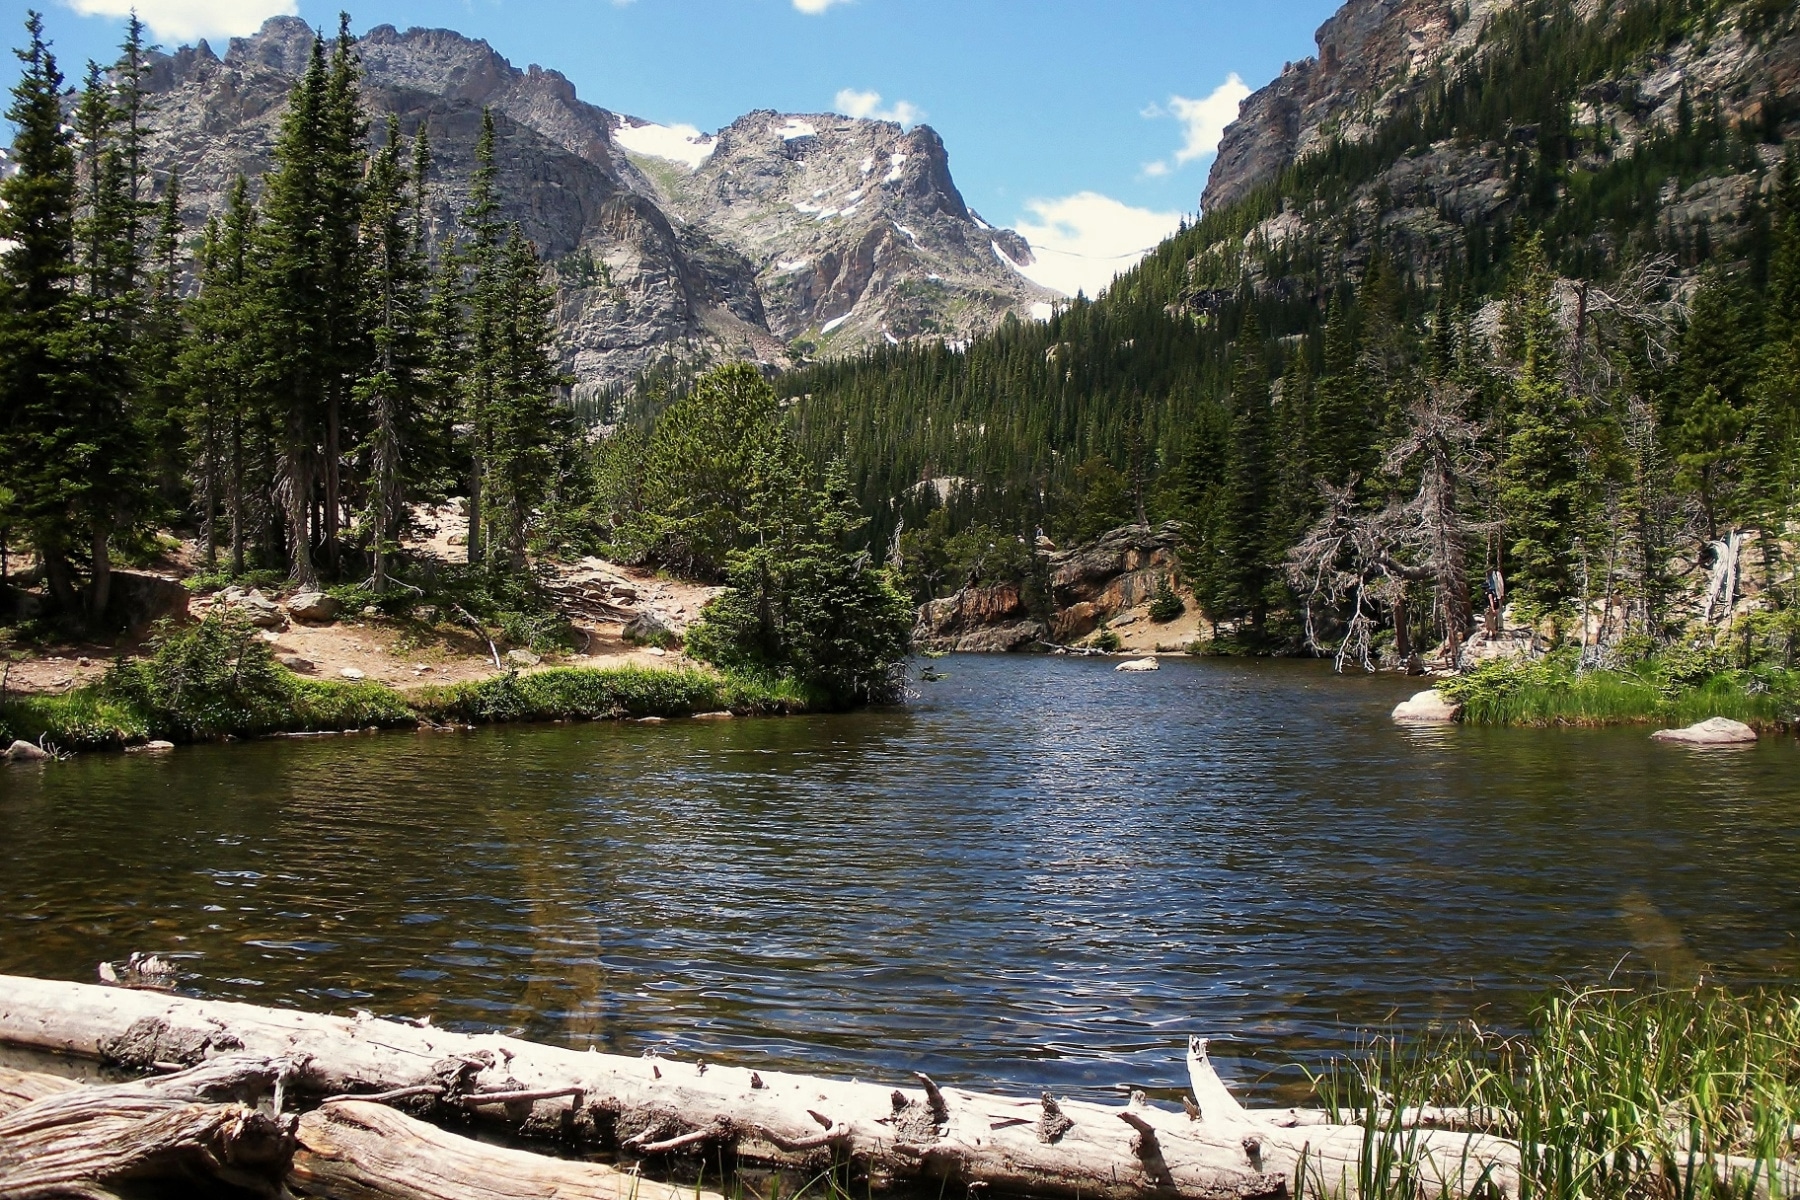 The Loch lake surrounded by mountains and pines in Rocky Mountain National Park.